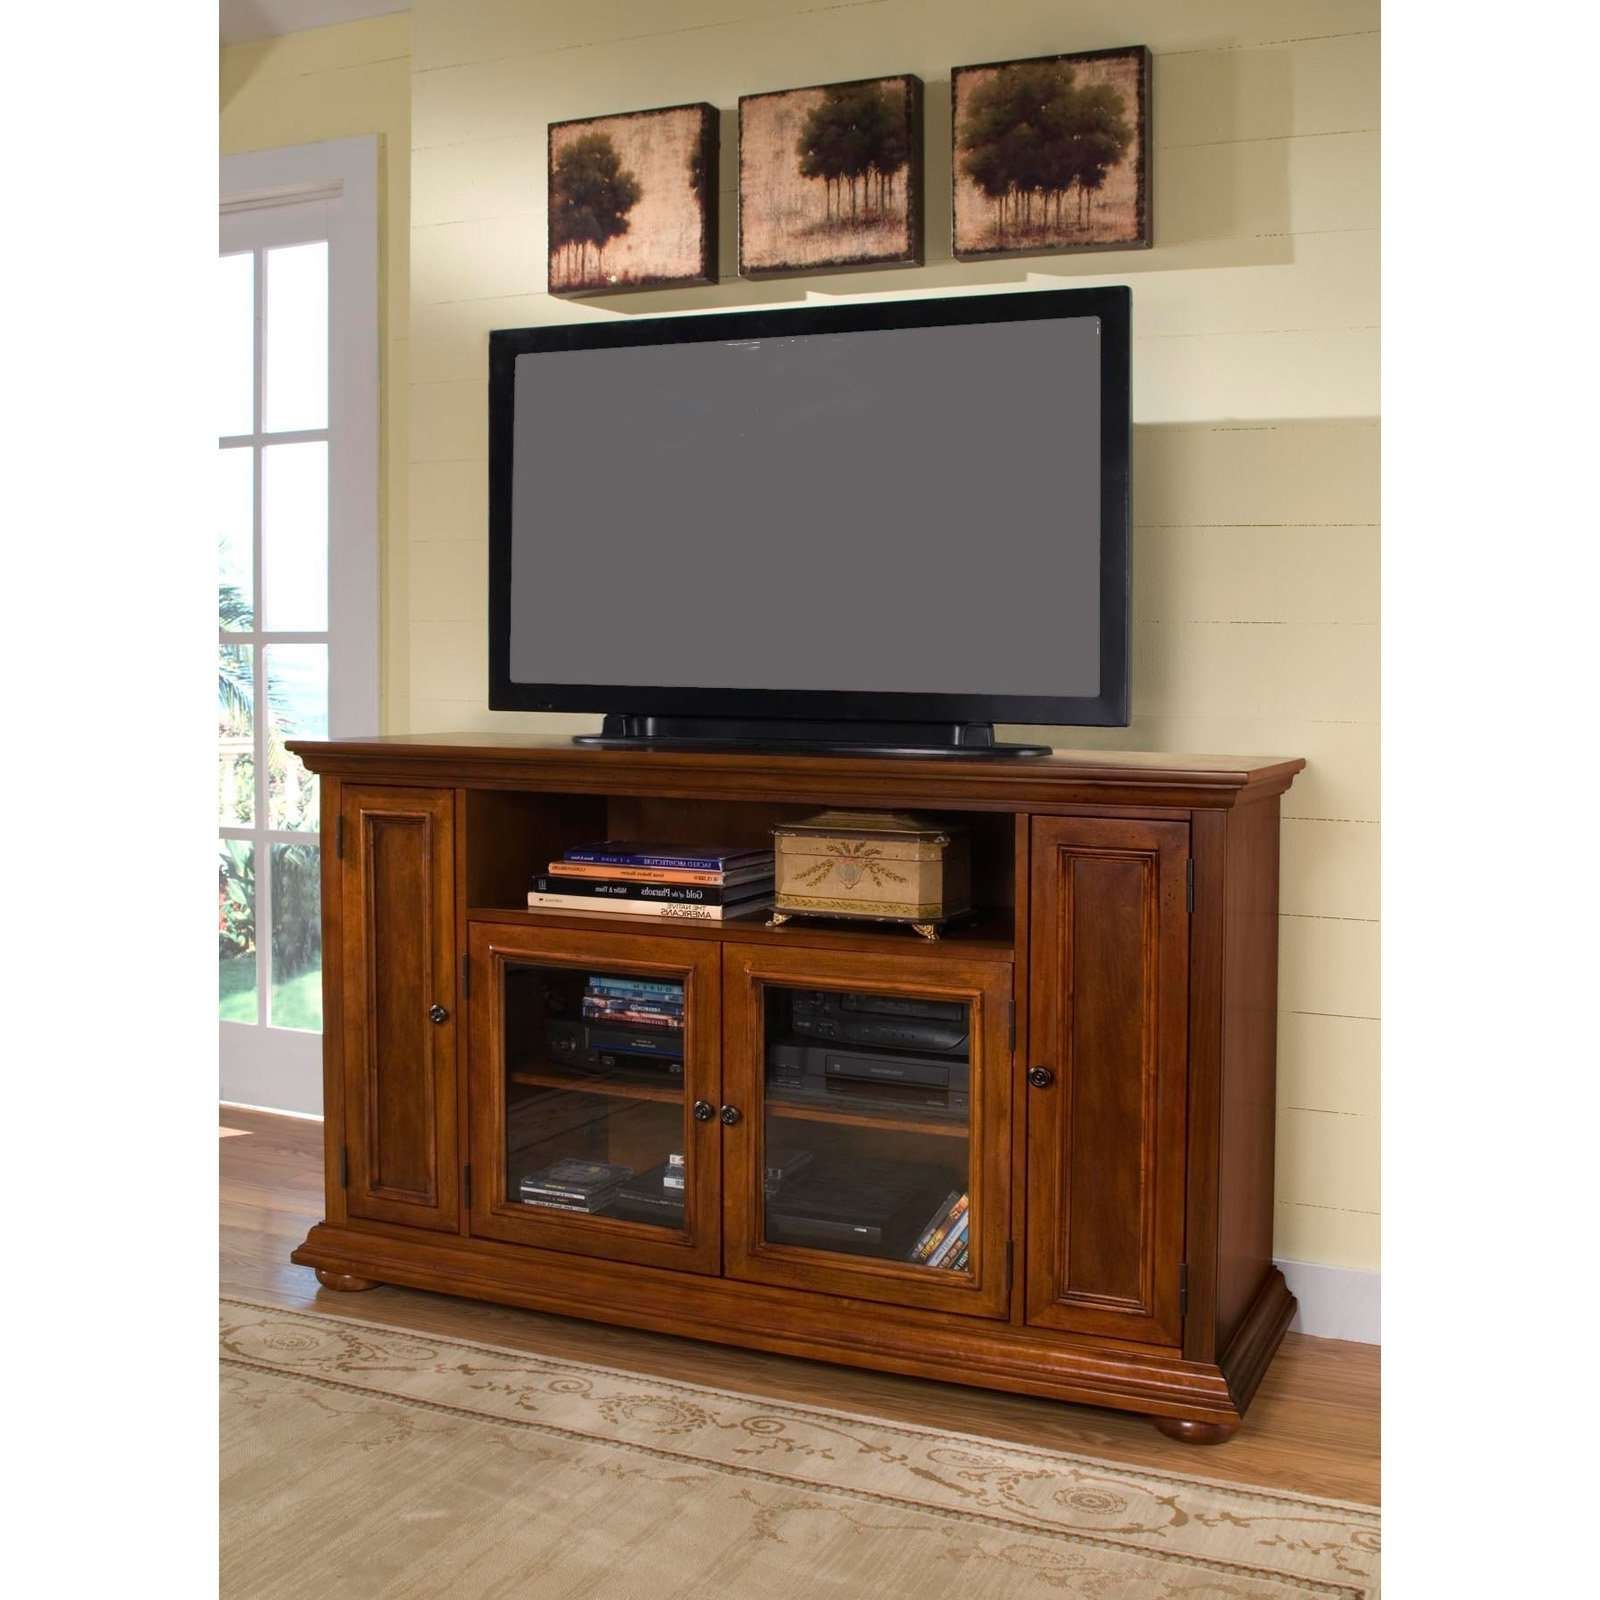 Rectangle Black Flat Screen Tv Over Brown Wooden Cabinet With In Wall Mounted Tv Cabinets With Doors (View 11 of 20)